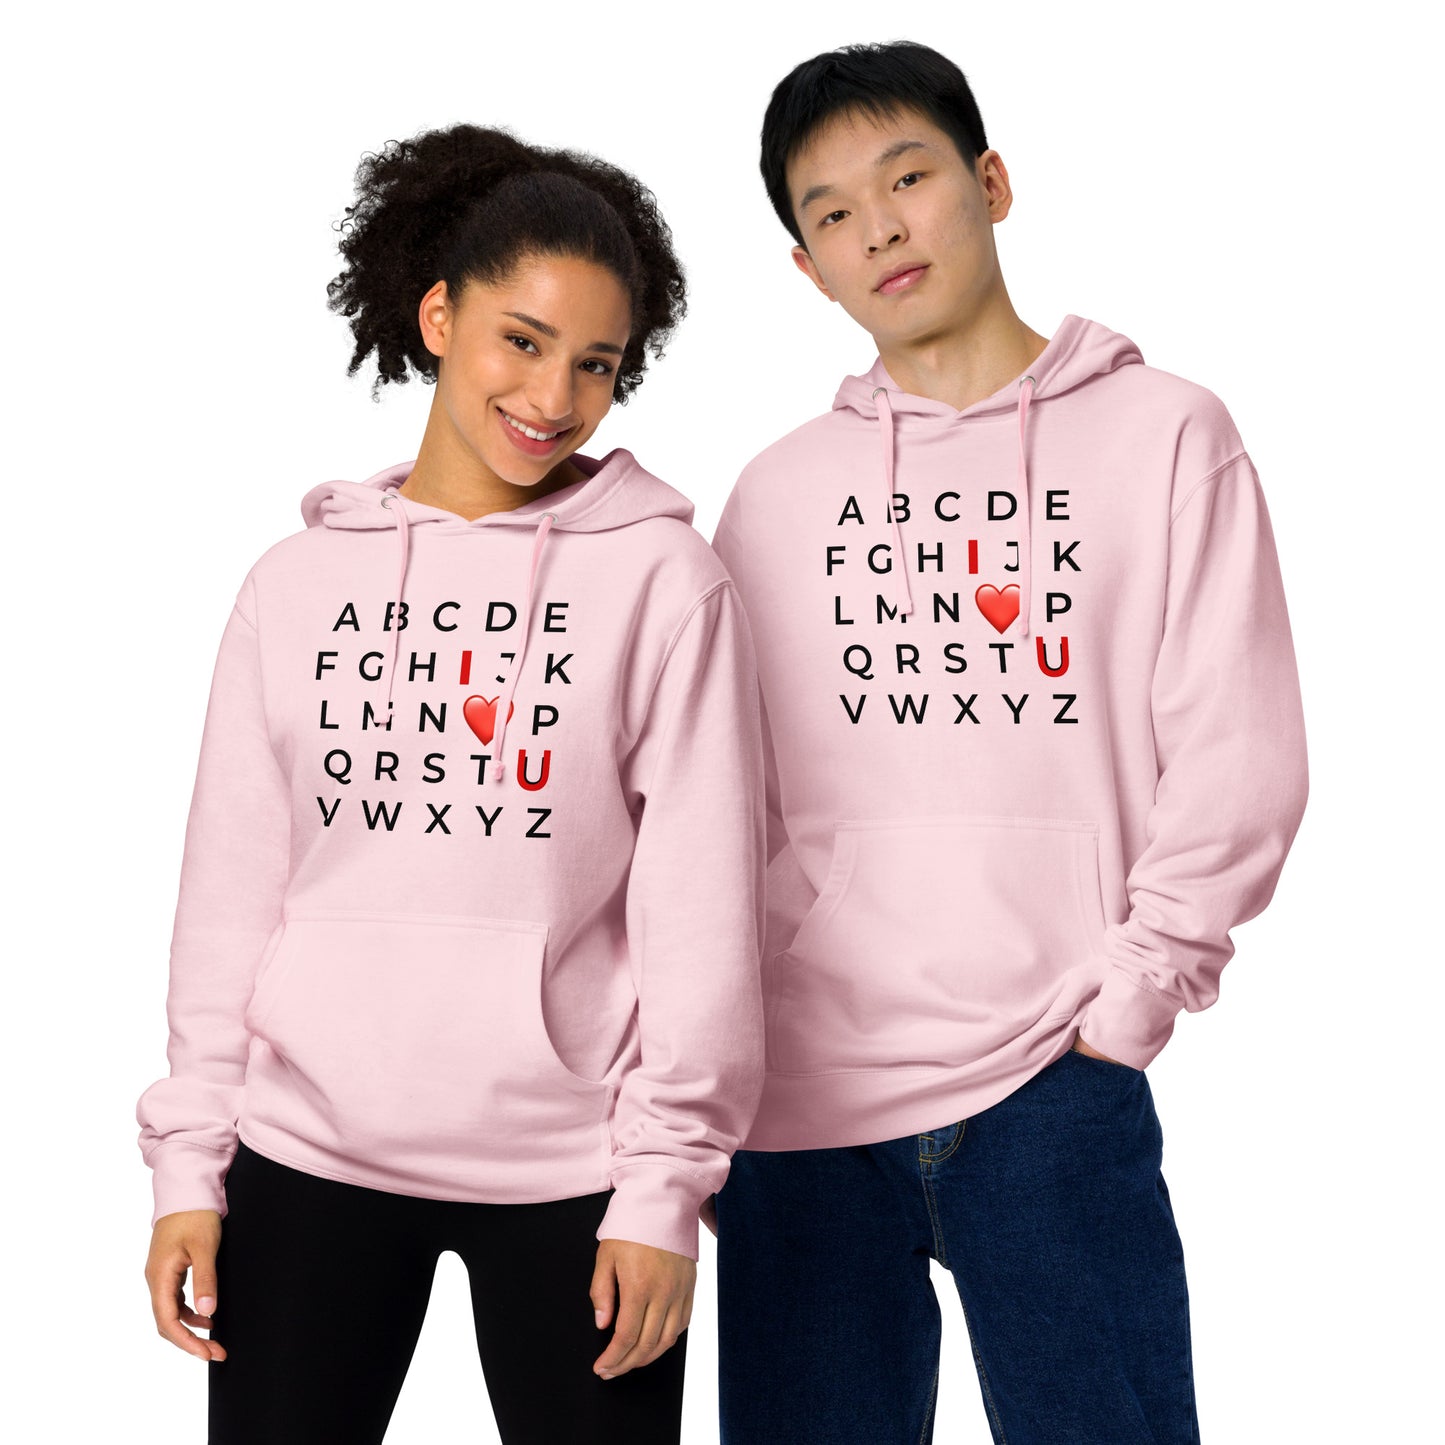 I Love You... Unisex midweight hoodie